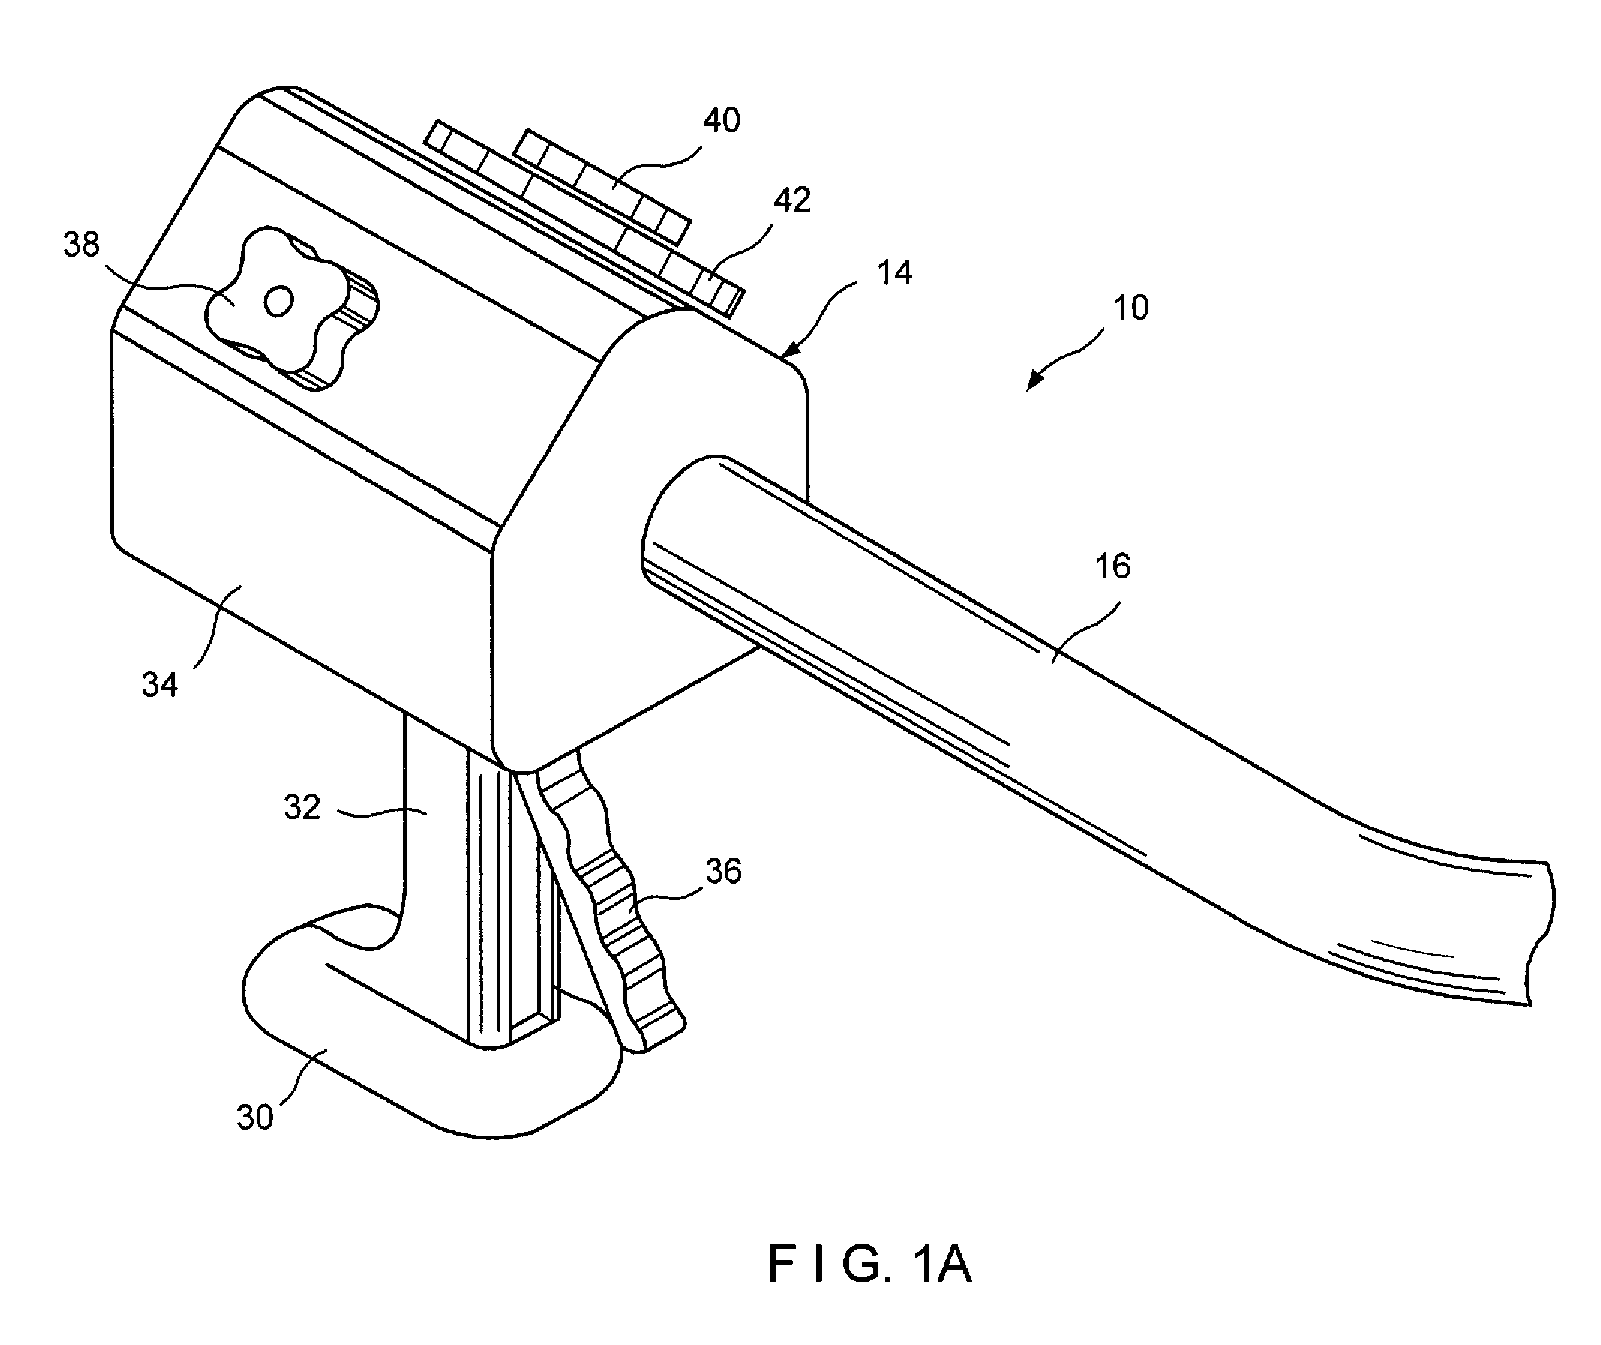 Surgical Apparatus and Method